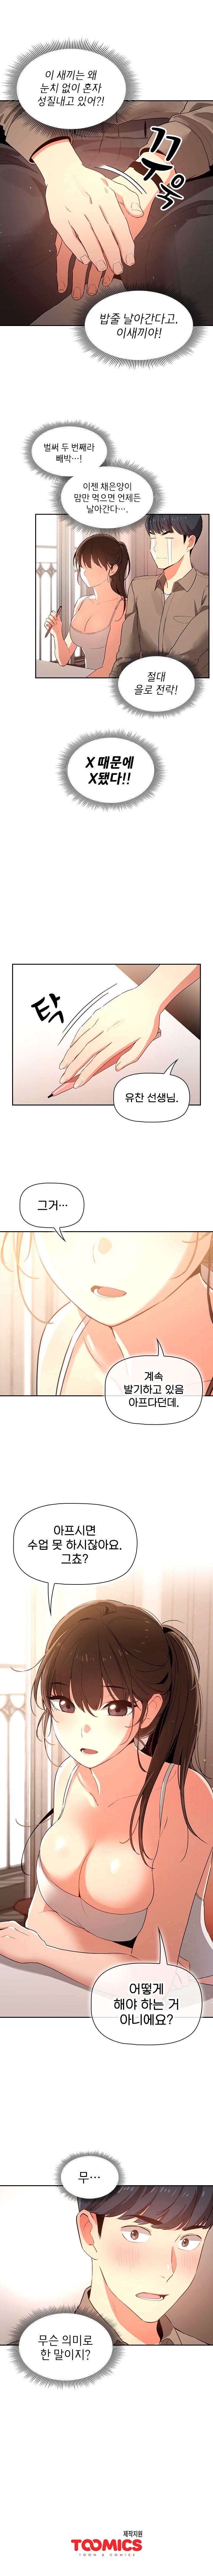 private-tutoring-in-pandemic-raw-chap-3-3